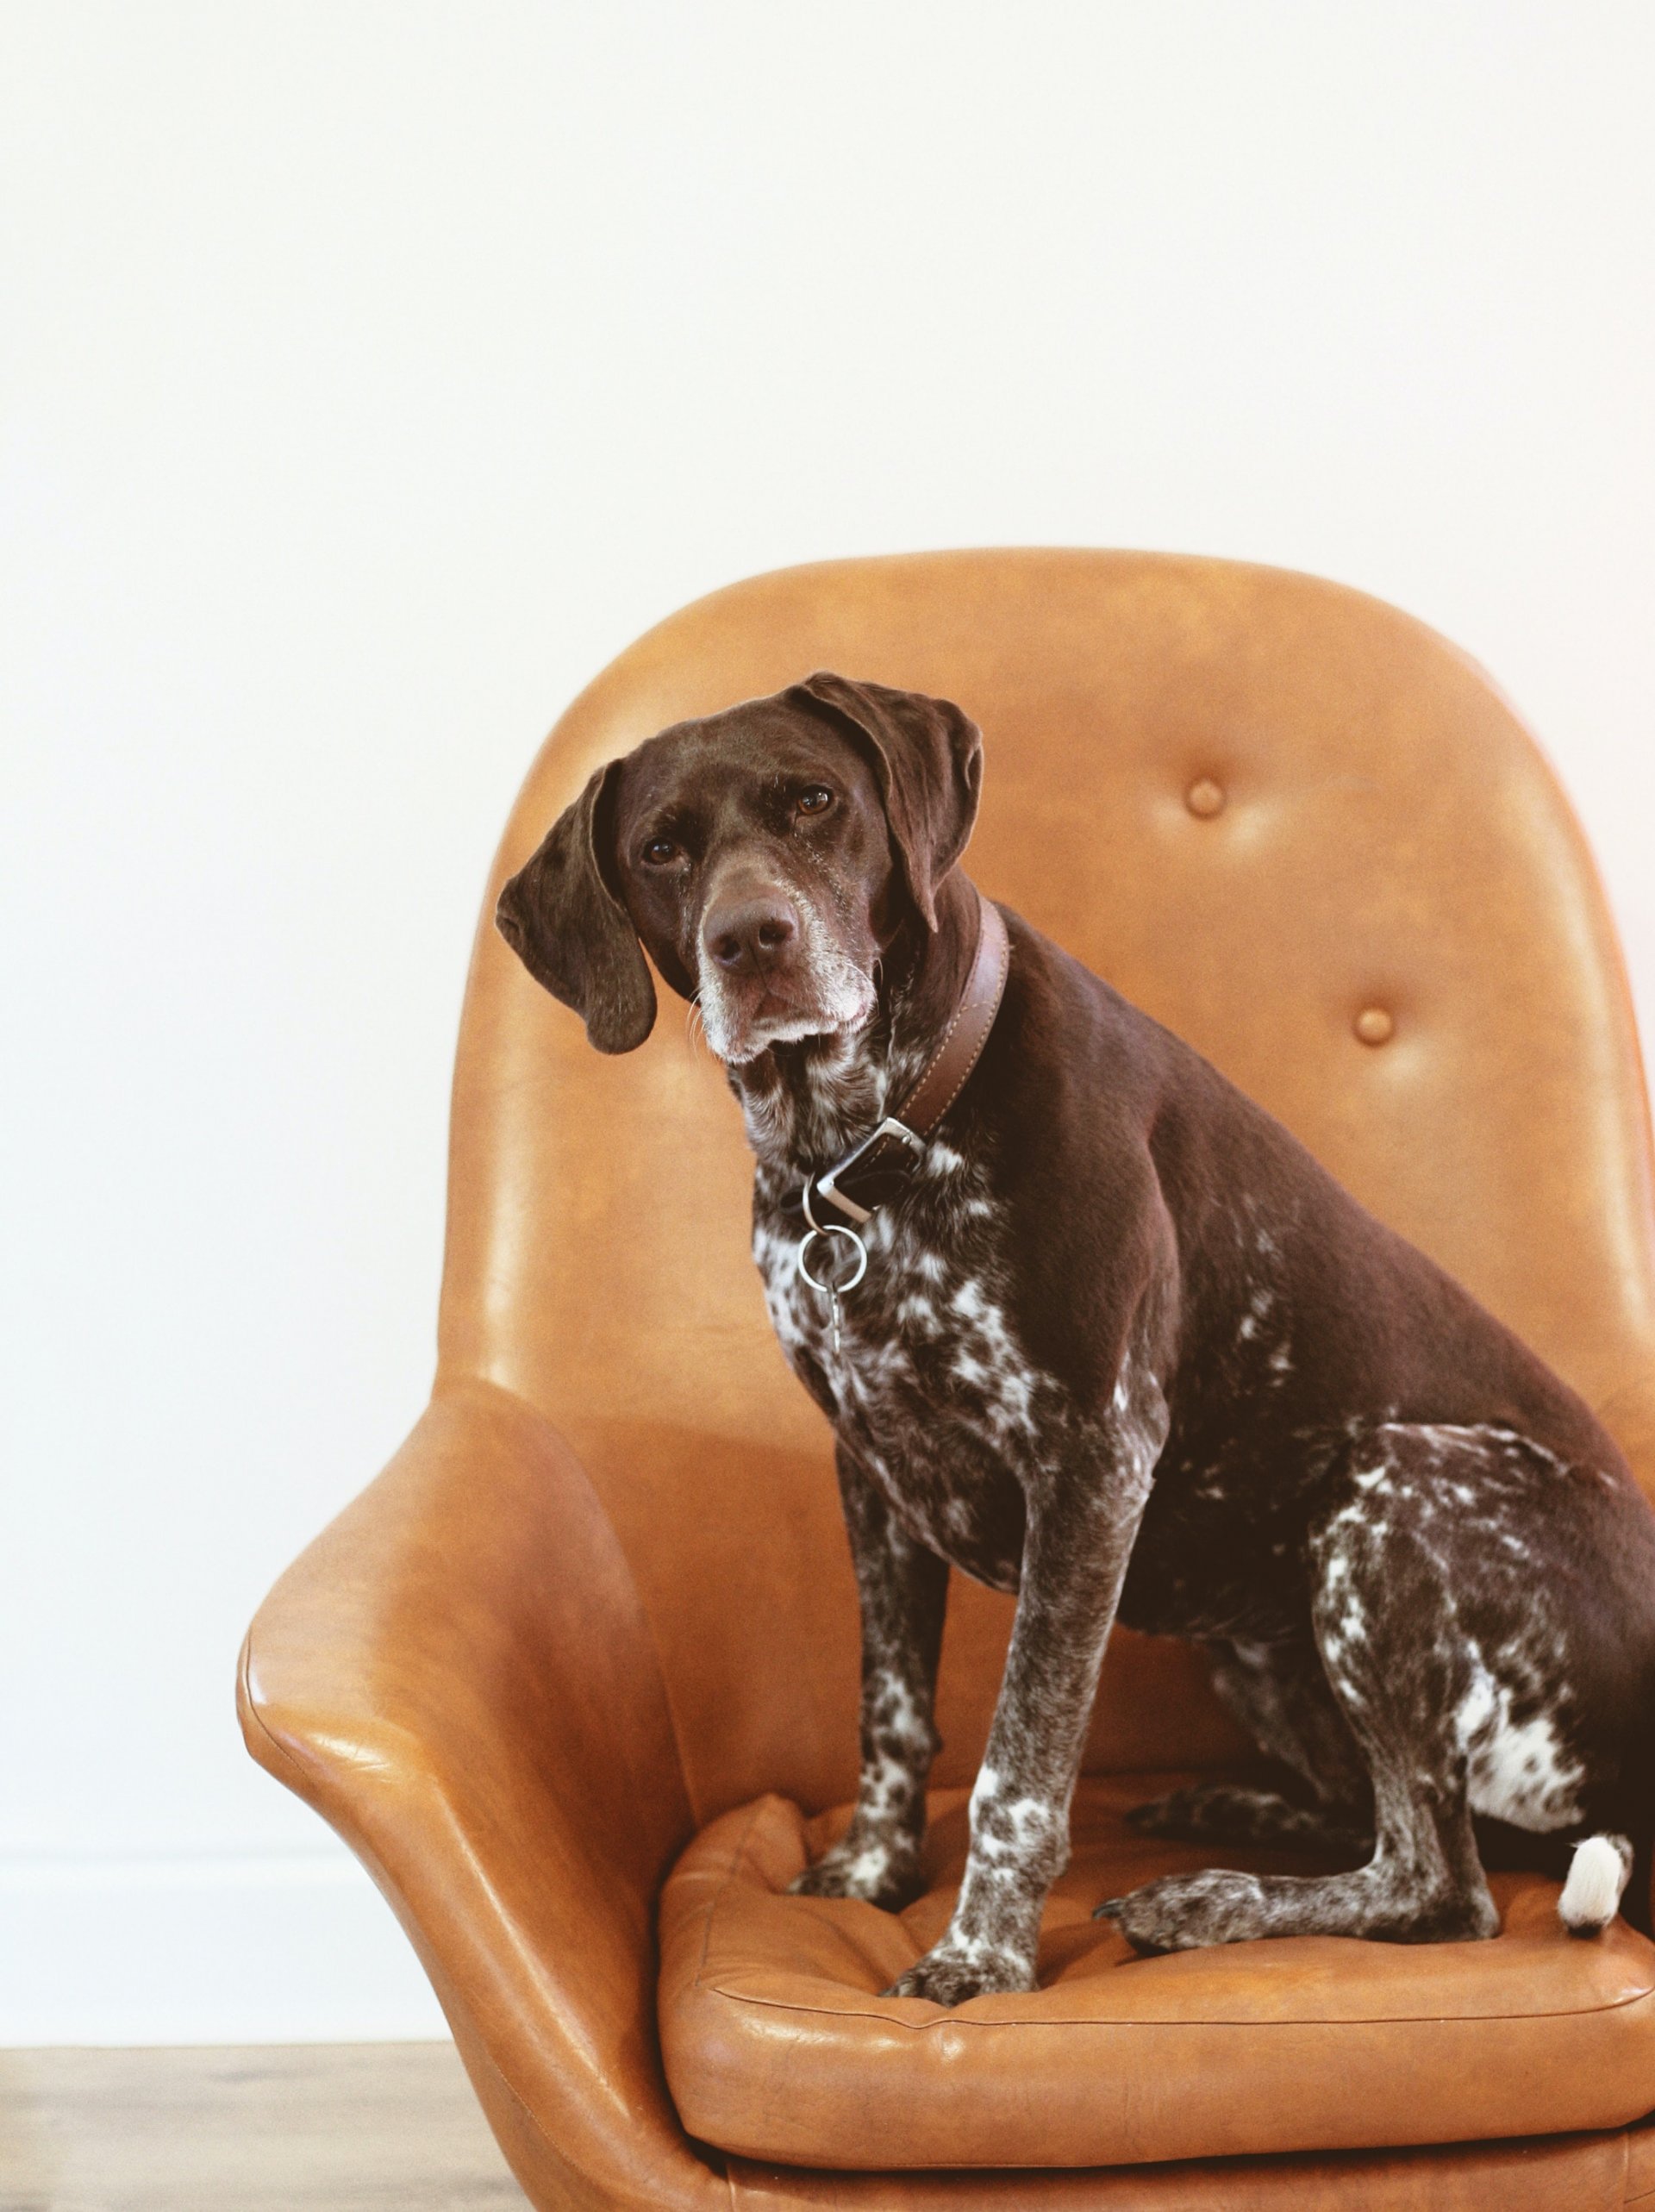 German Shorthaired Pointer dog on a chair